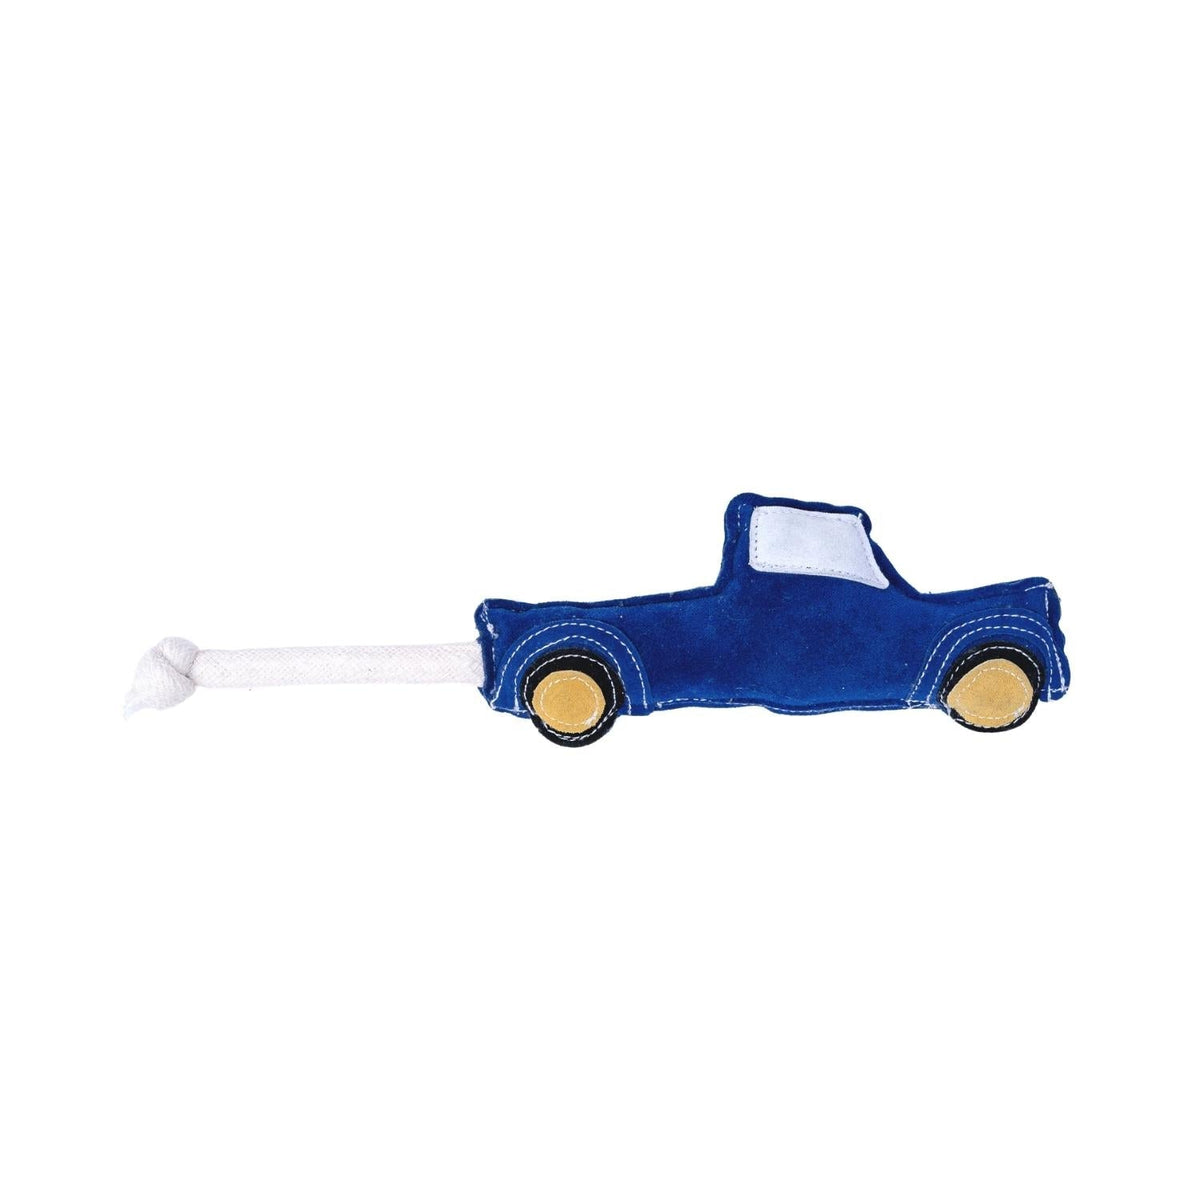 Vegan Leather Blue Pickup Truck Eco Friendly Dog Toy by American Pet Supplies